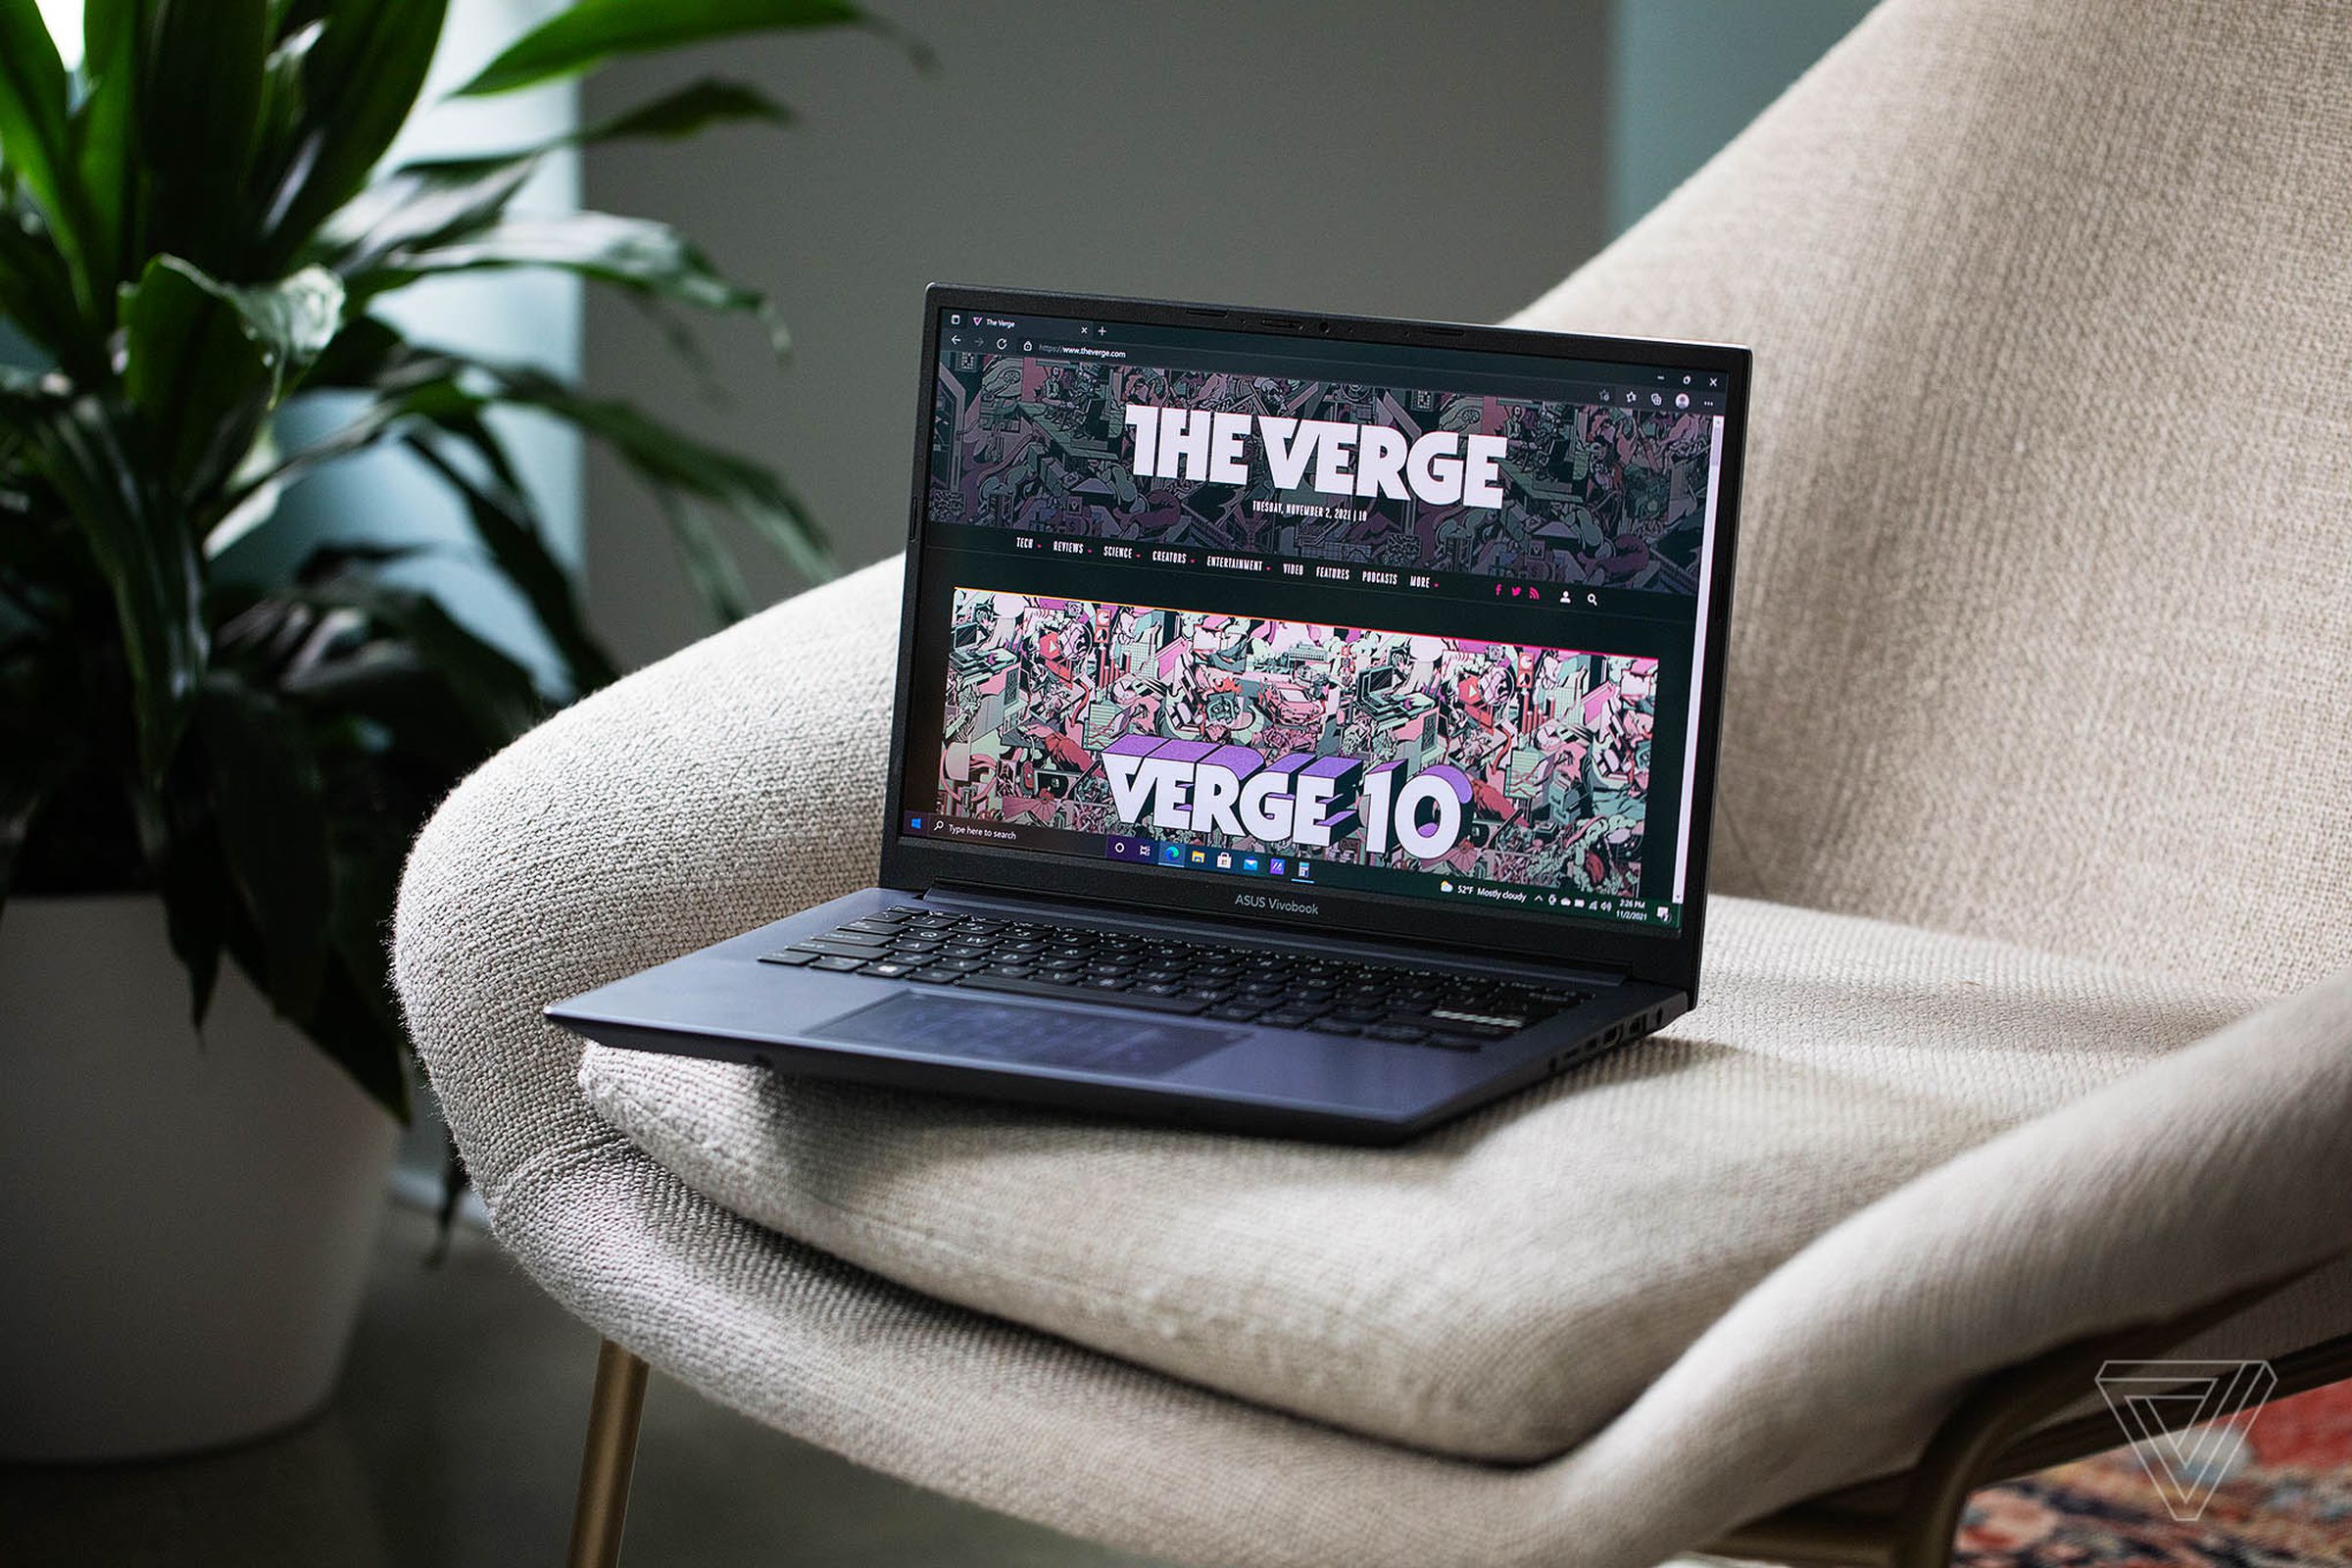 The Asus Vivobook Pro 14 open and angled to the left on a white plush chair with a houseplant to the left. The screen displays The Verge homepage.